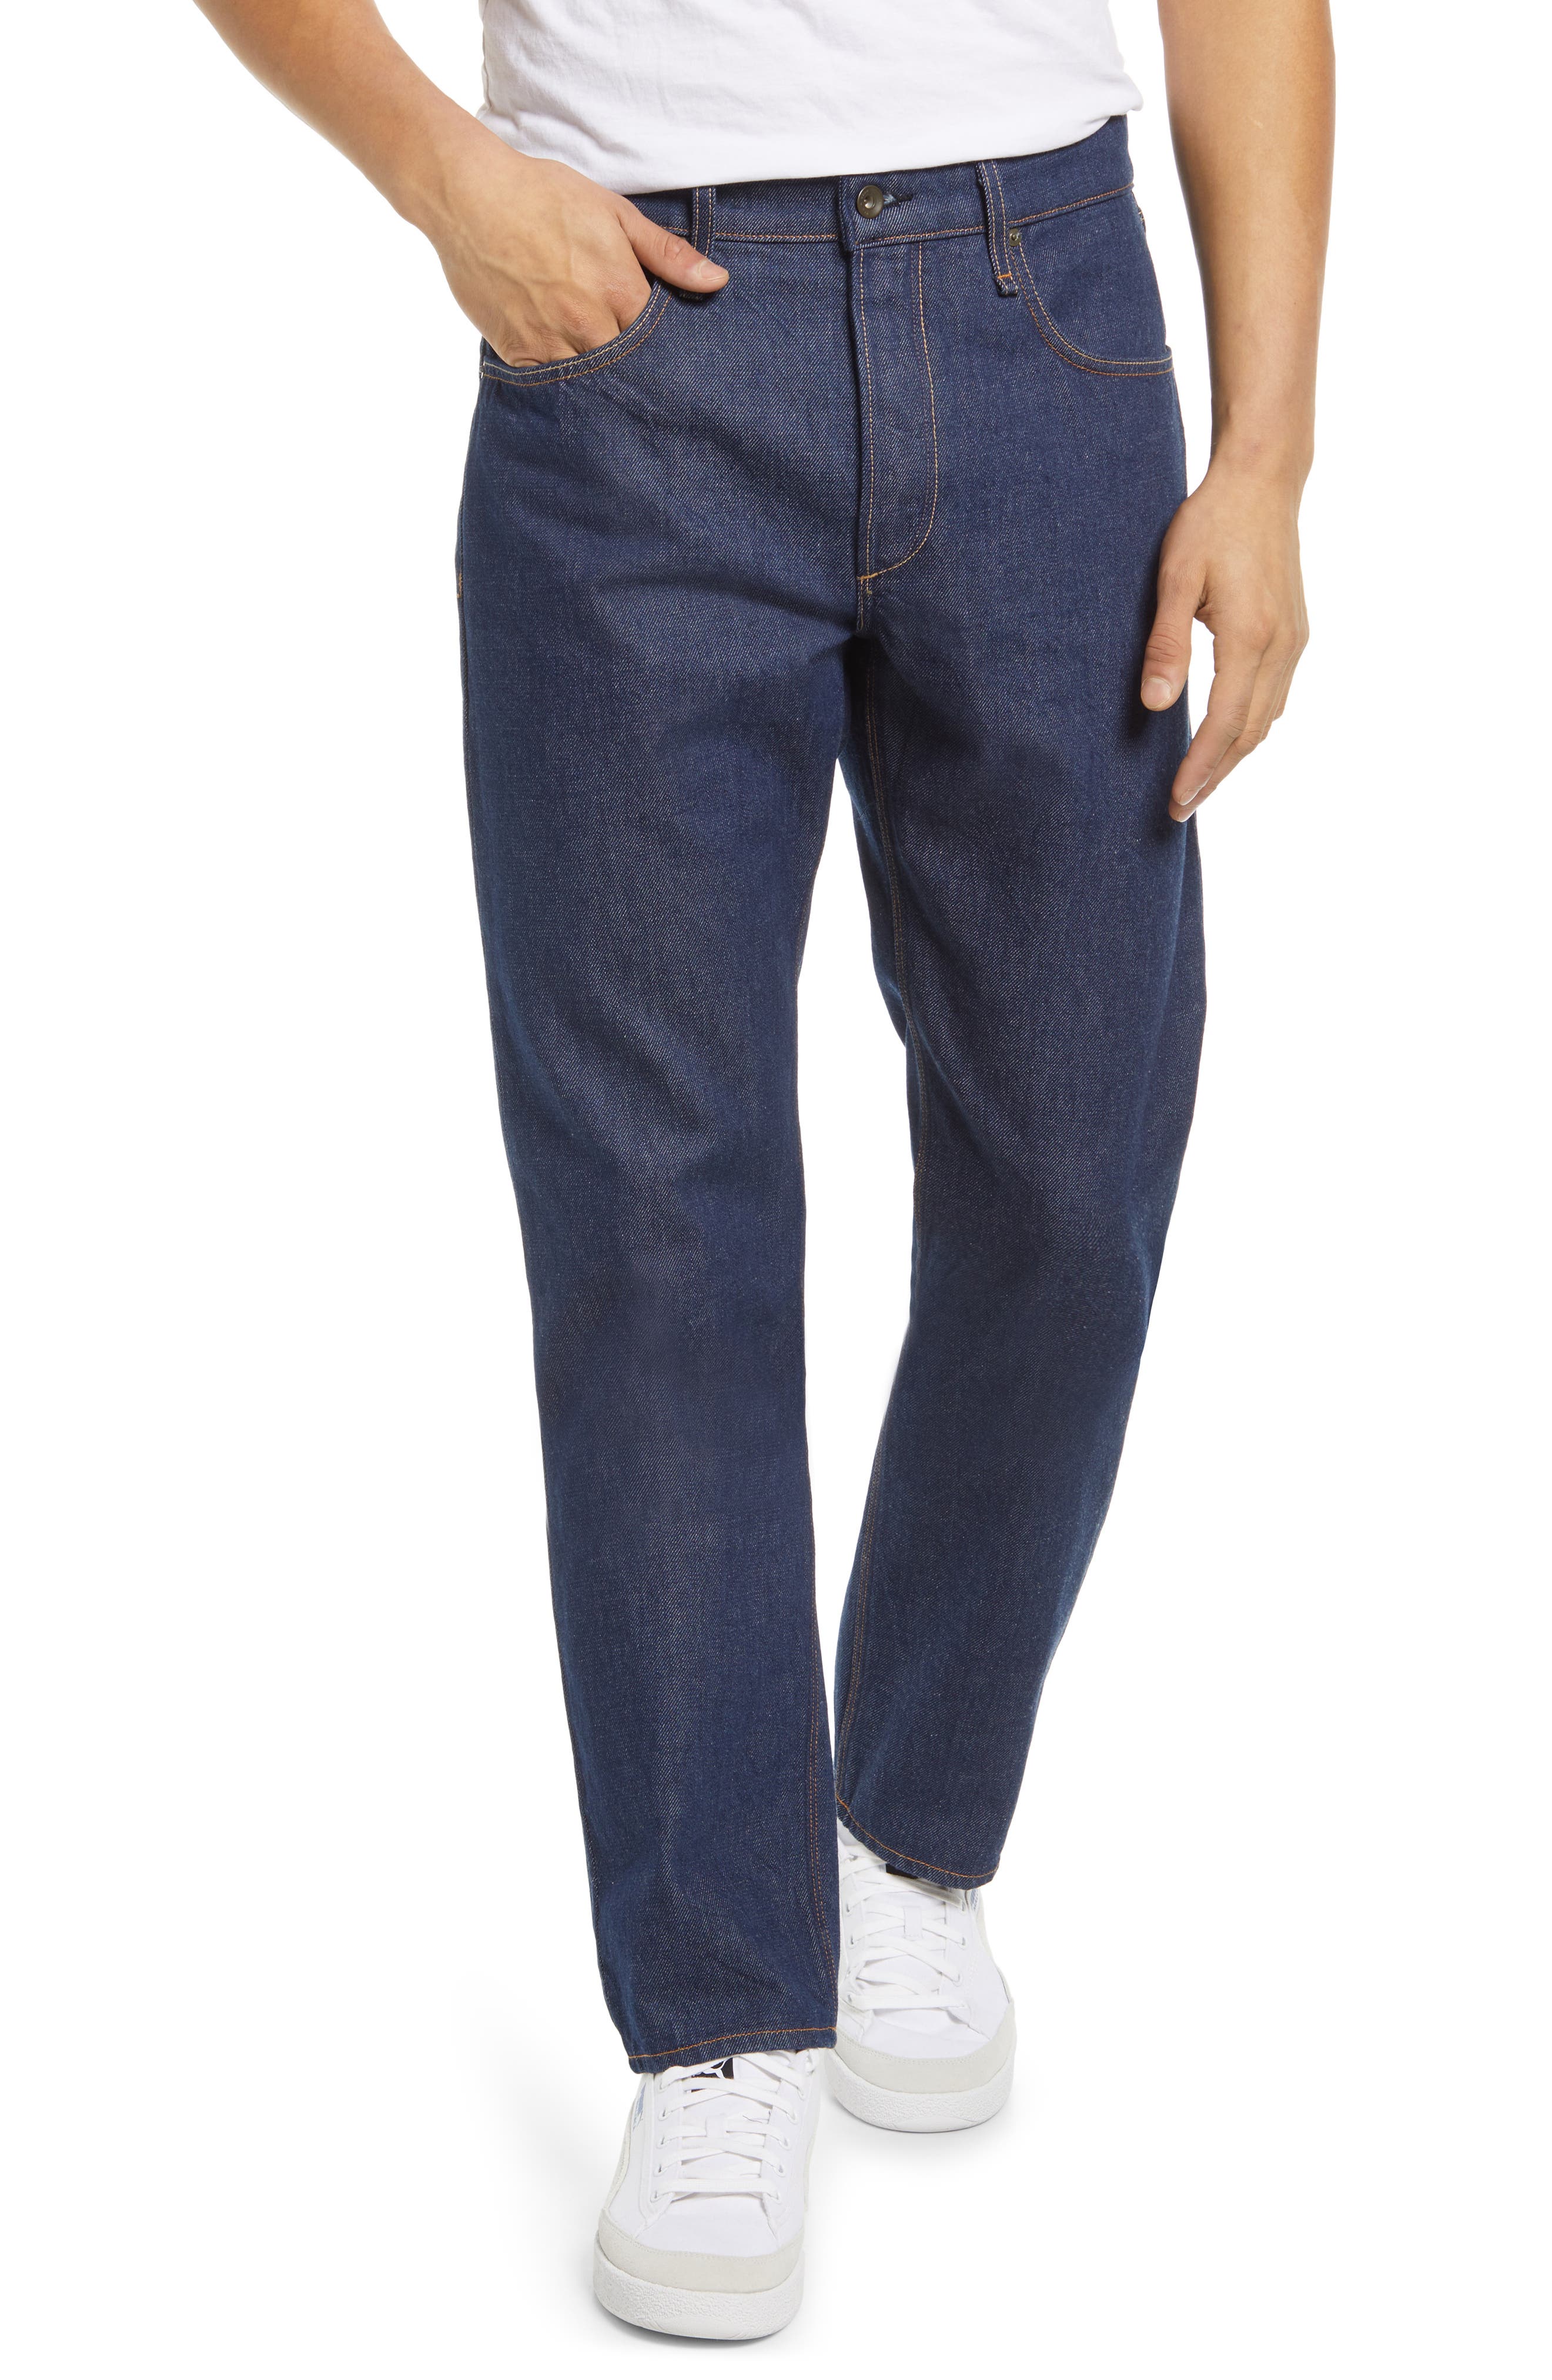 rag & bone Rb 21 Straight Leg Jeans in Rinse at Nordstrom, Size 33